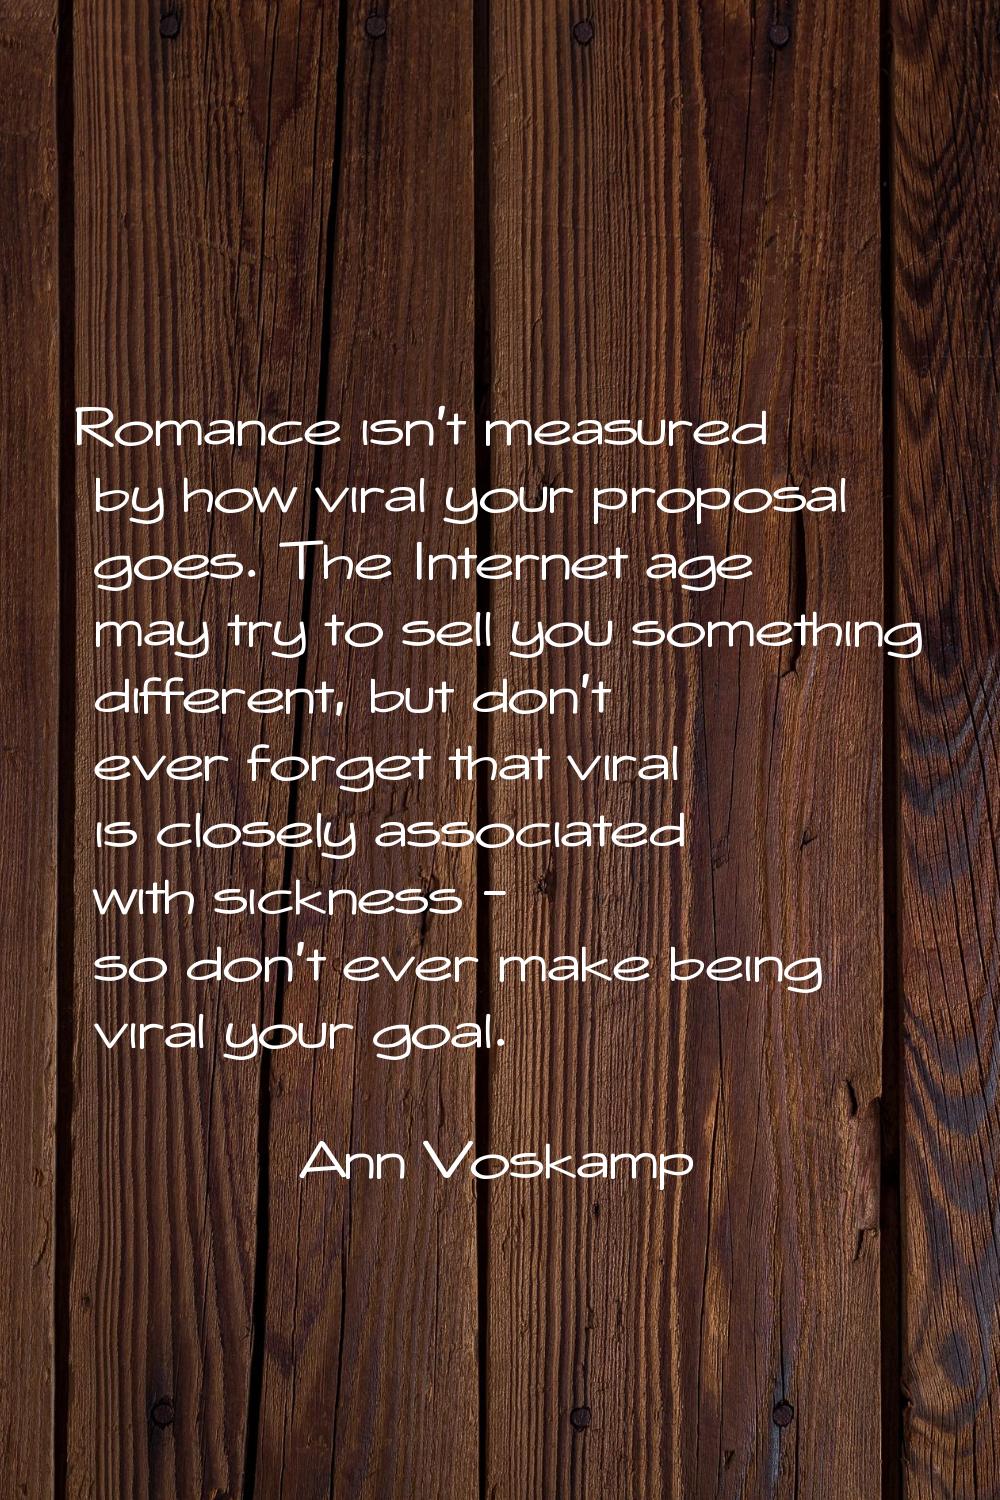 Romance isn't measured by how viral your proposal goes. The Internet age may try to sell you someth